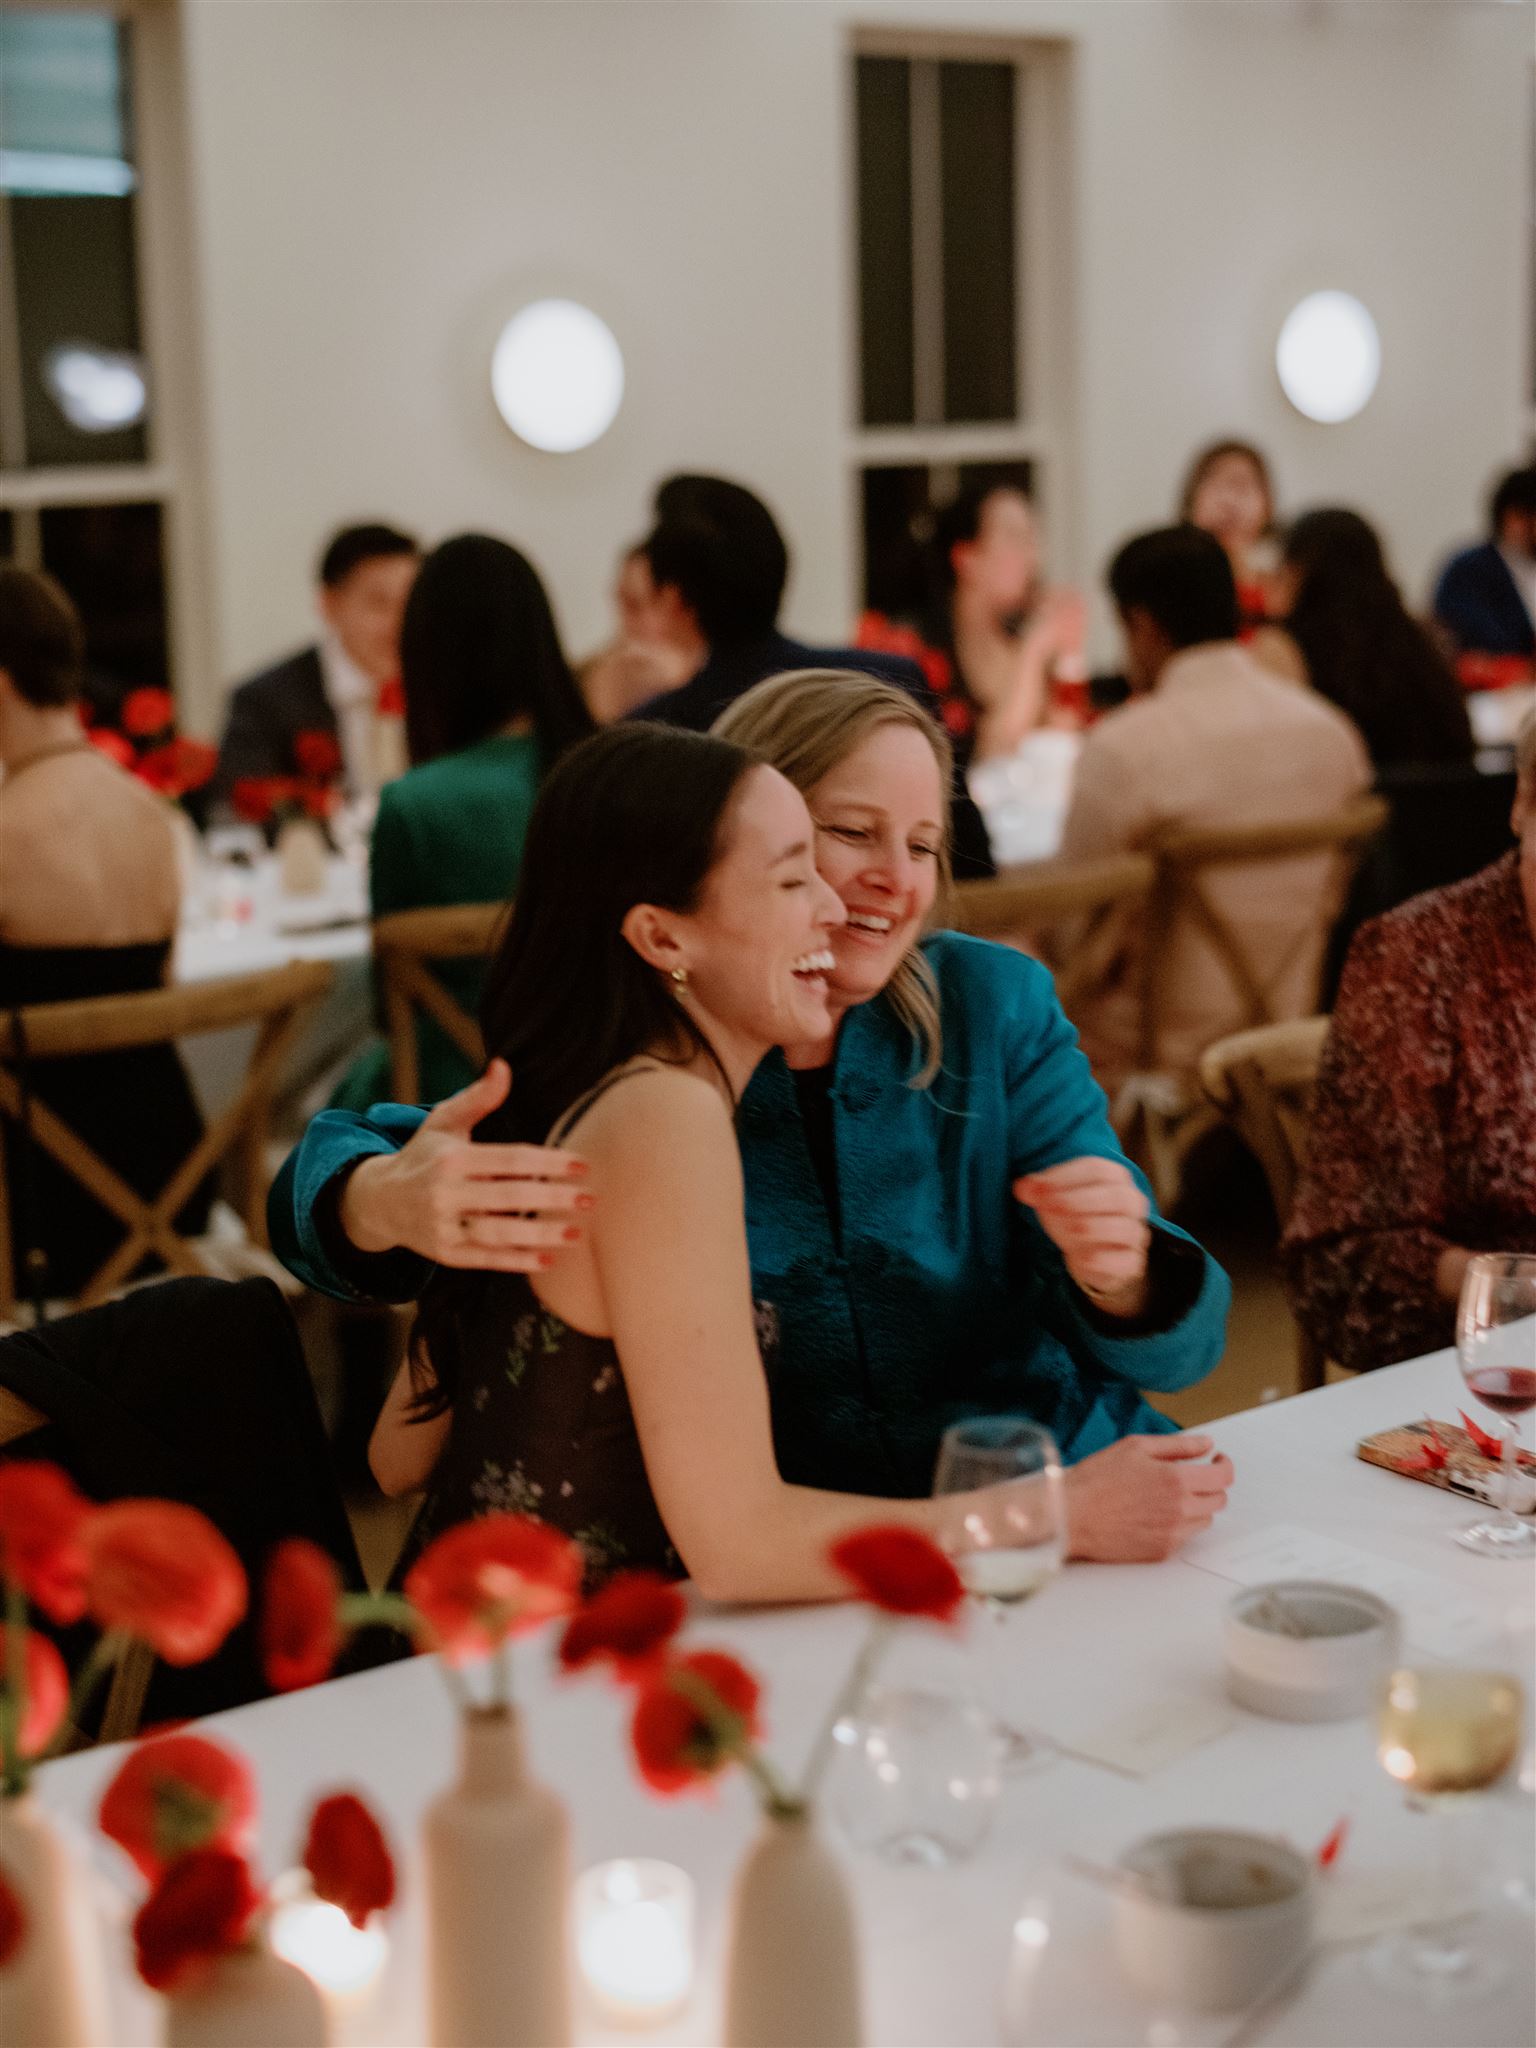 The bride-to-be is happily hugging a guest at their welcome dinner in Troutbeck, New York. Candid image by Jenny Fu Studio